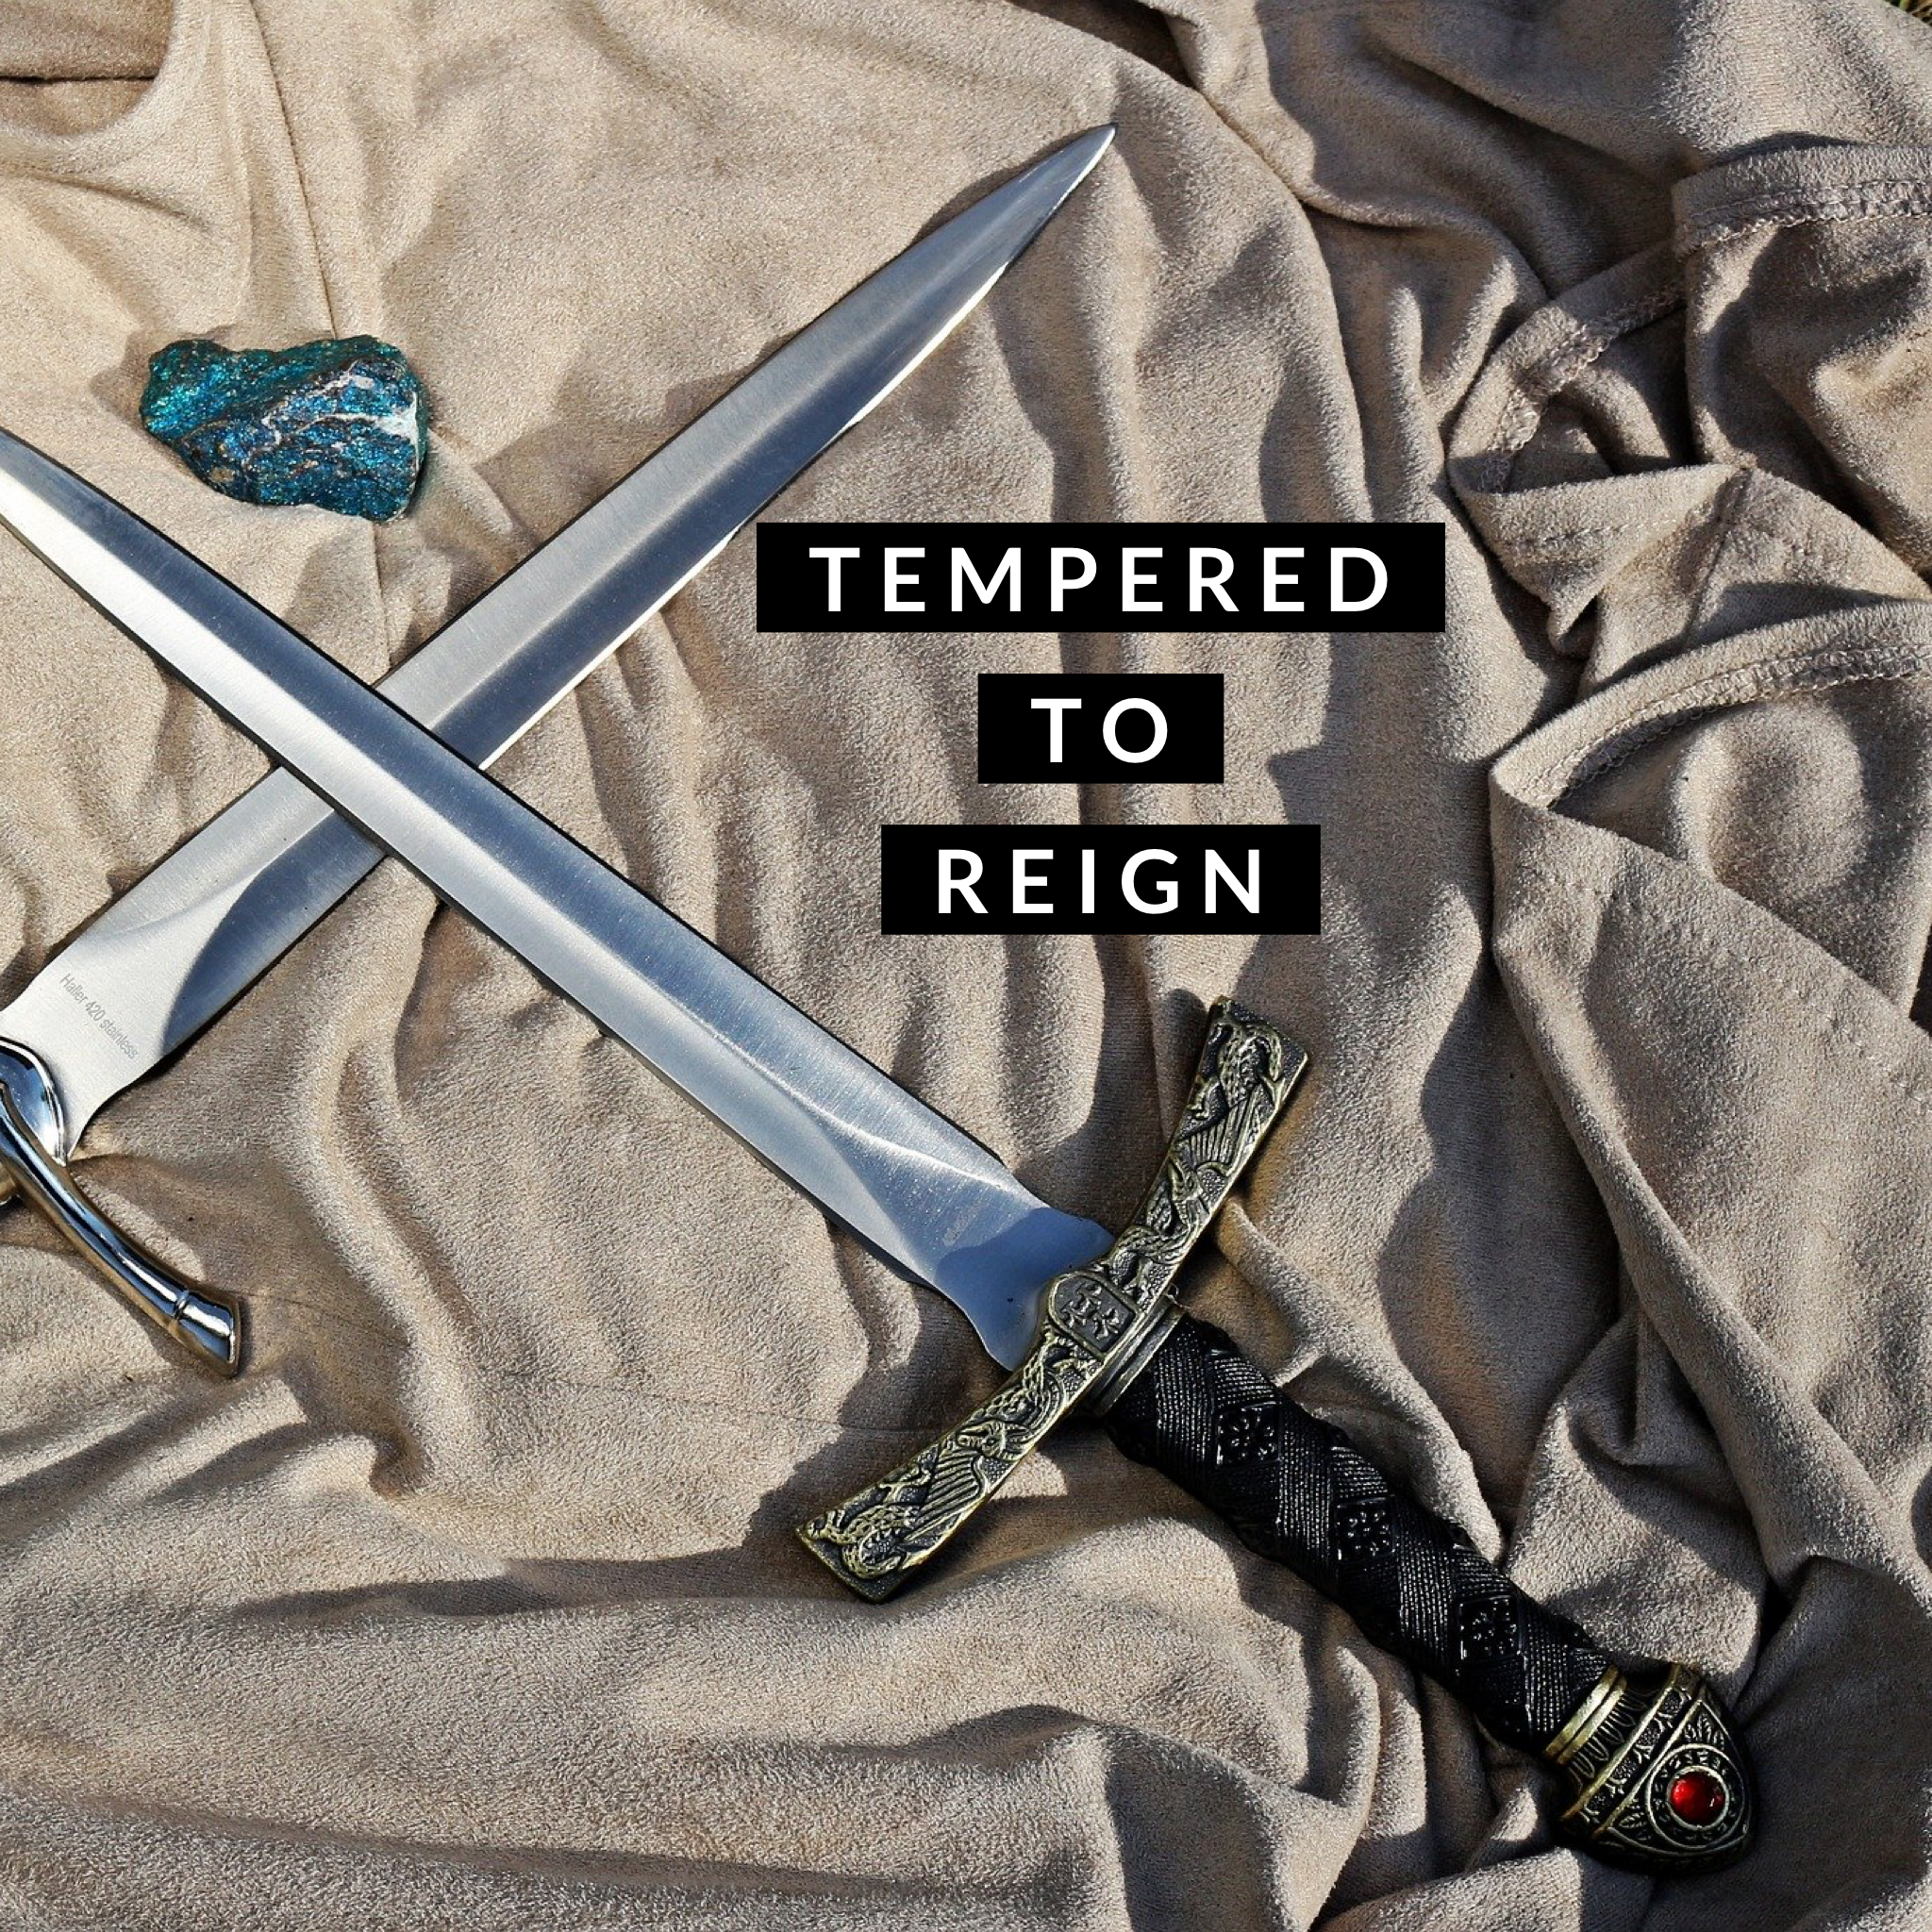 Tempered to Reign - 3/10/20